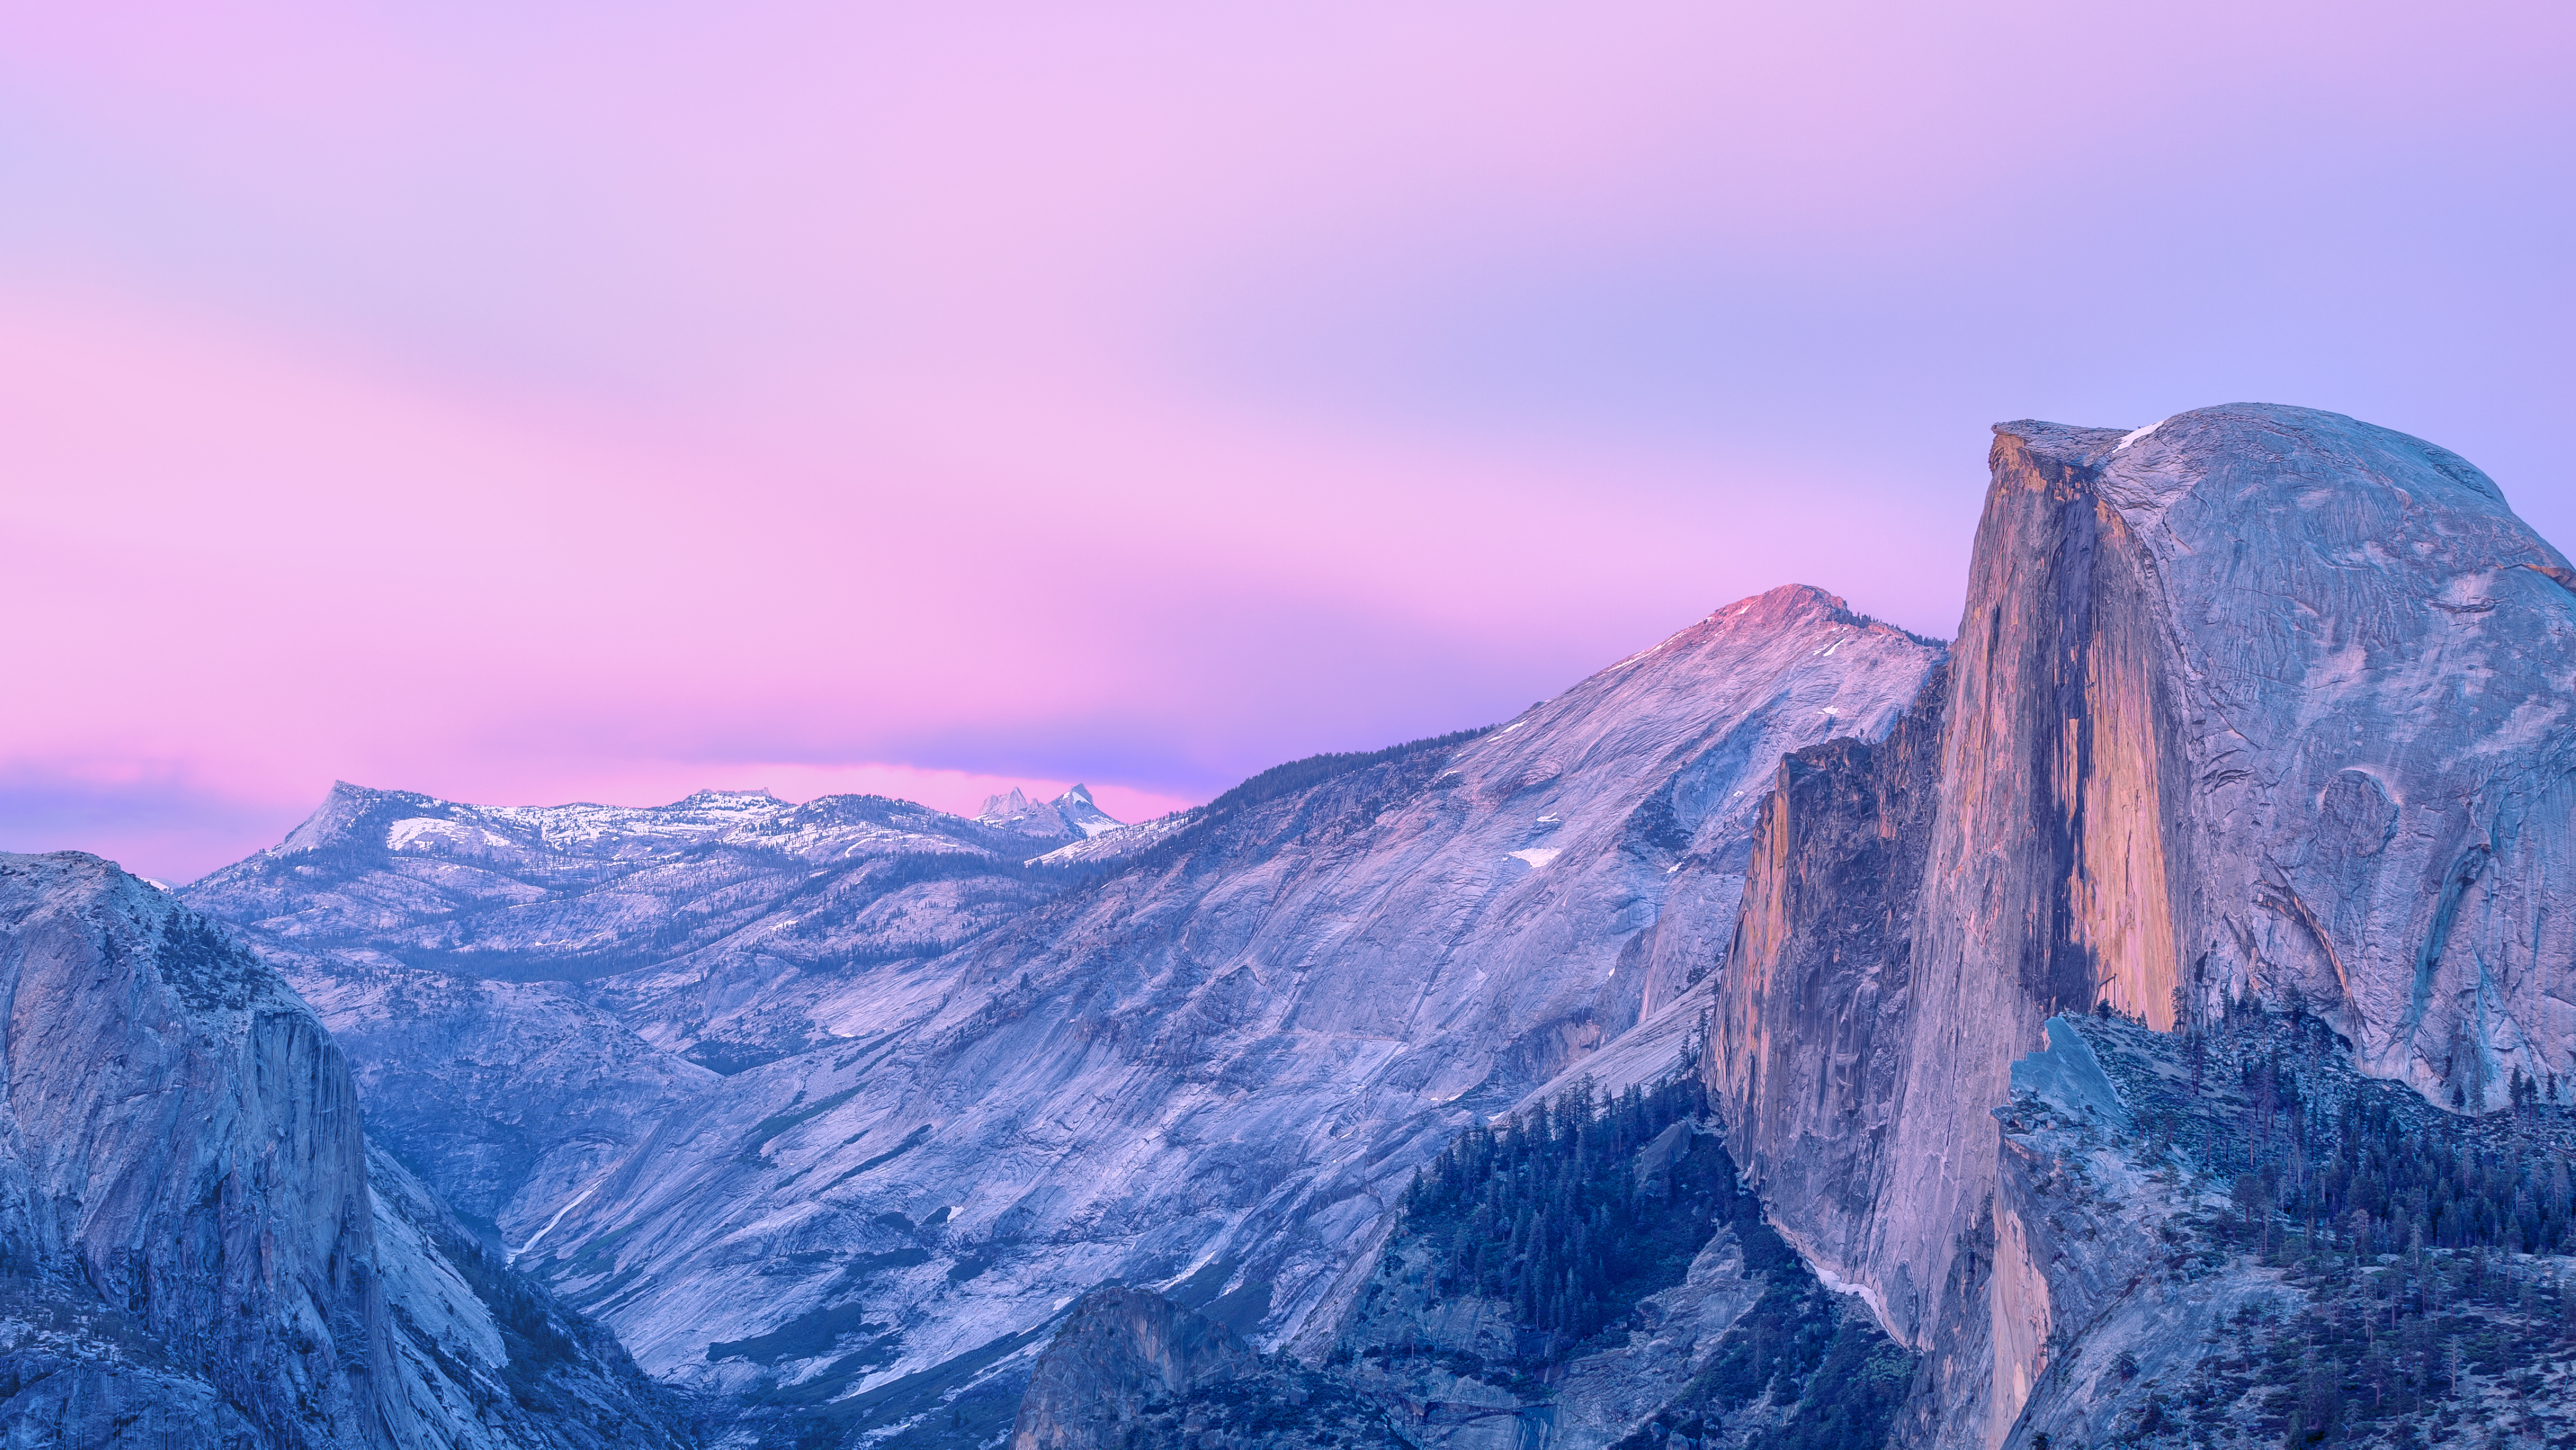 General 5118x2880 pink mountains nature sky landscape Yosemite National Park Half Dome USA rocks rock formation valley California